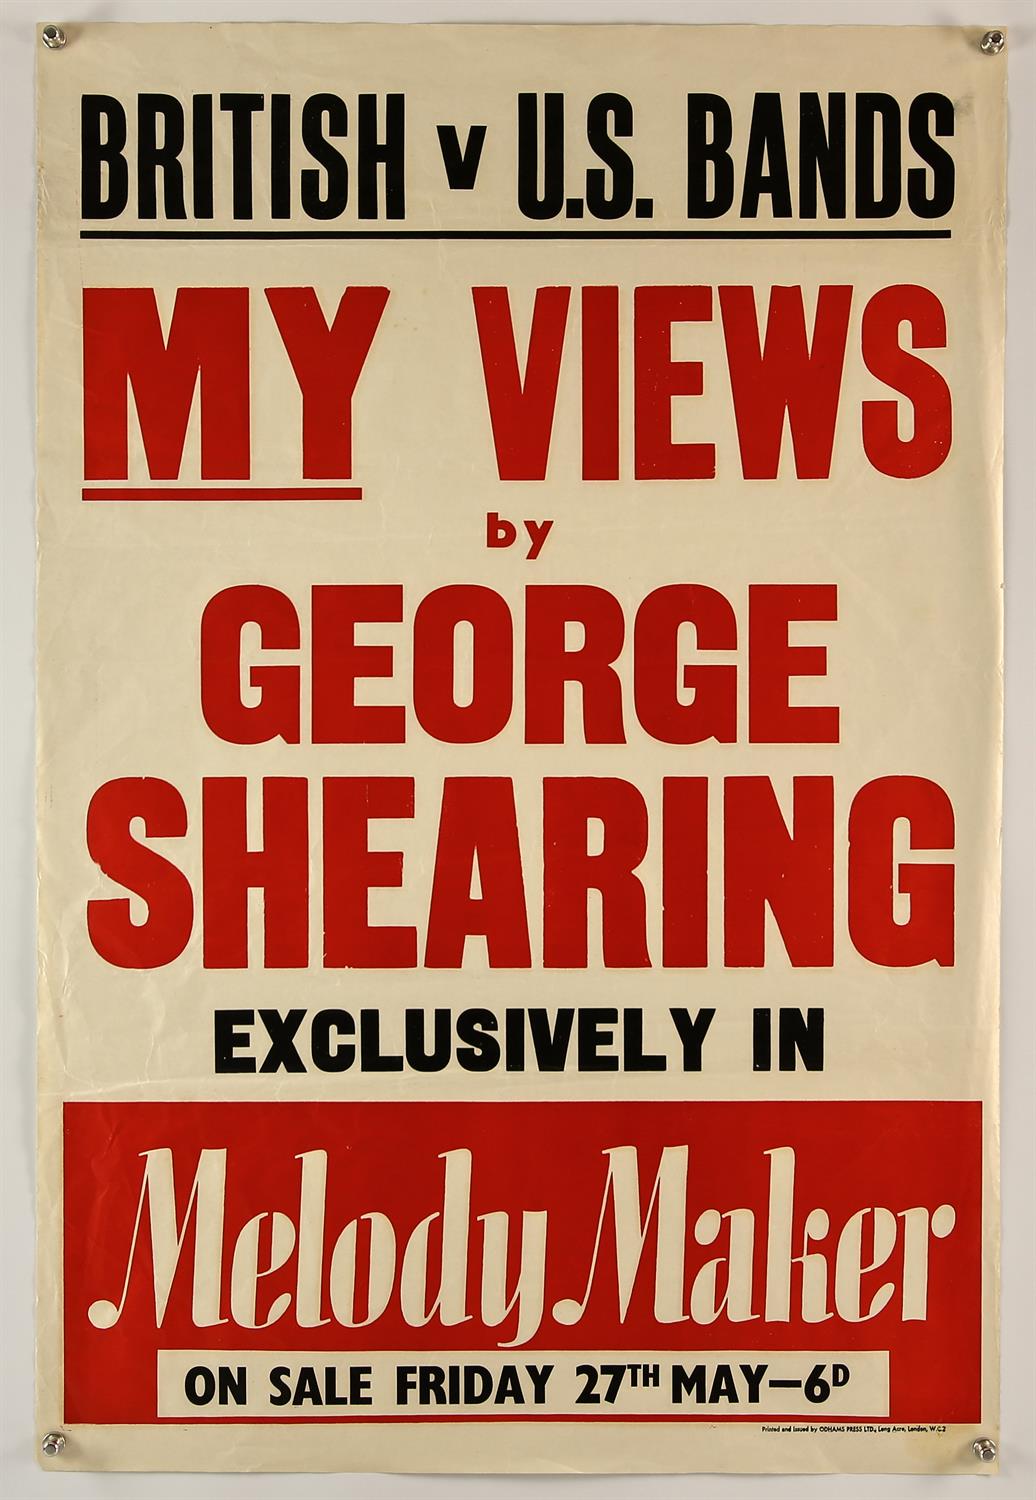 My Views By George Shearing, Melody Maker UK headline poster, undated, 30 by 20 inches approx,